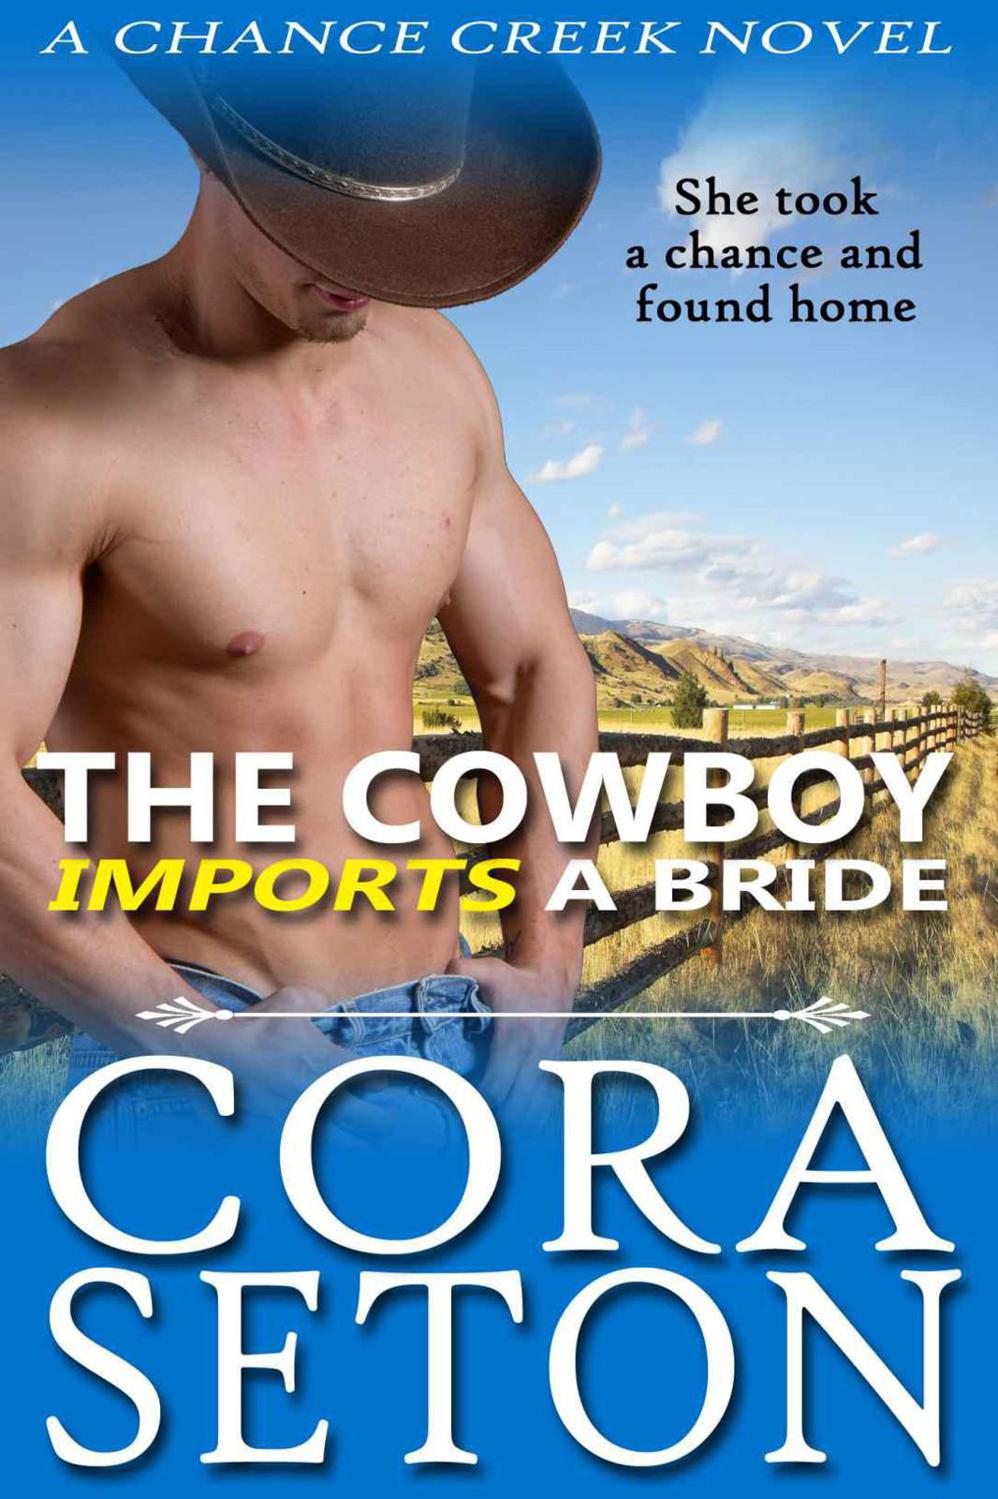 The Cowboy Imports a Bride(The Cowboys Of Chance Creek #3)